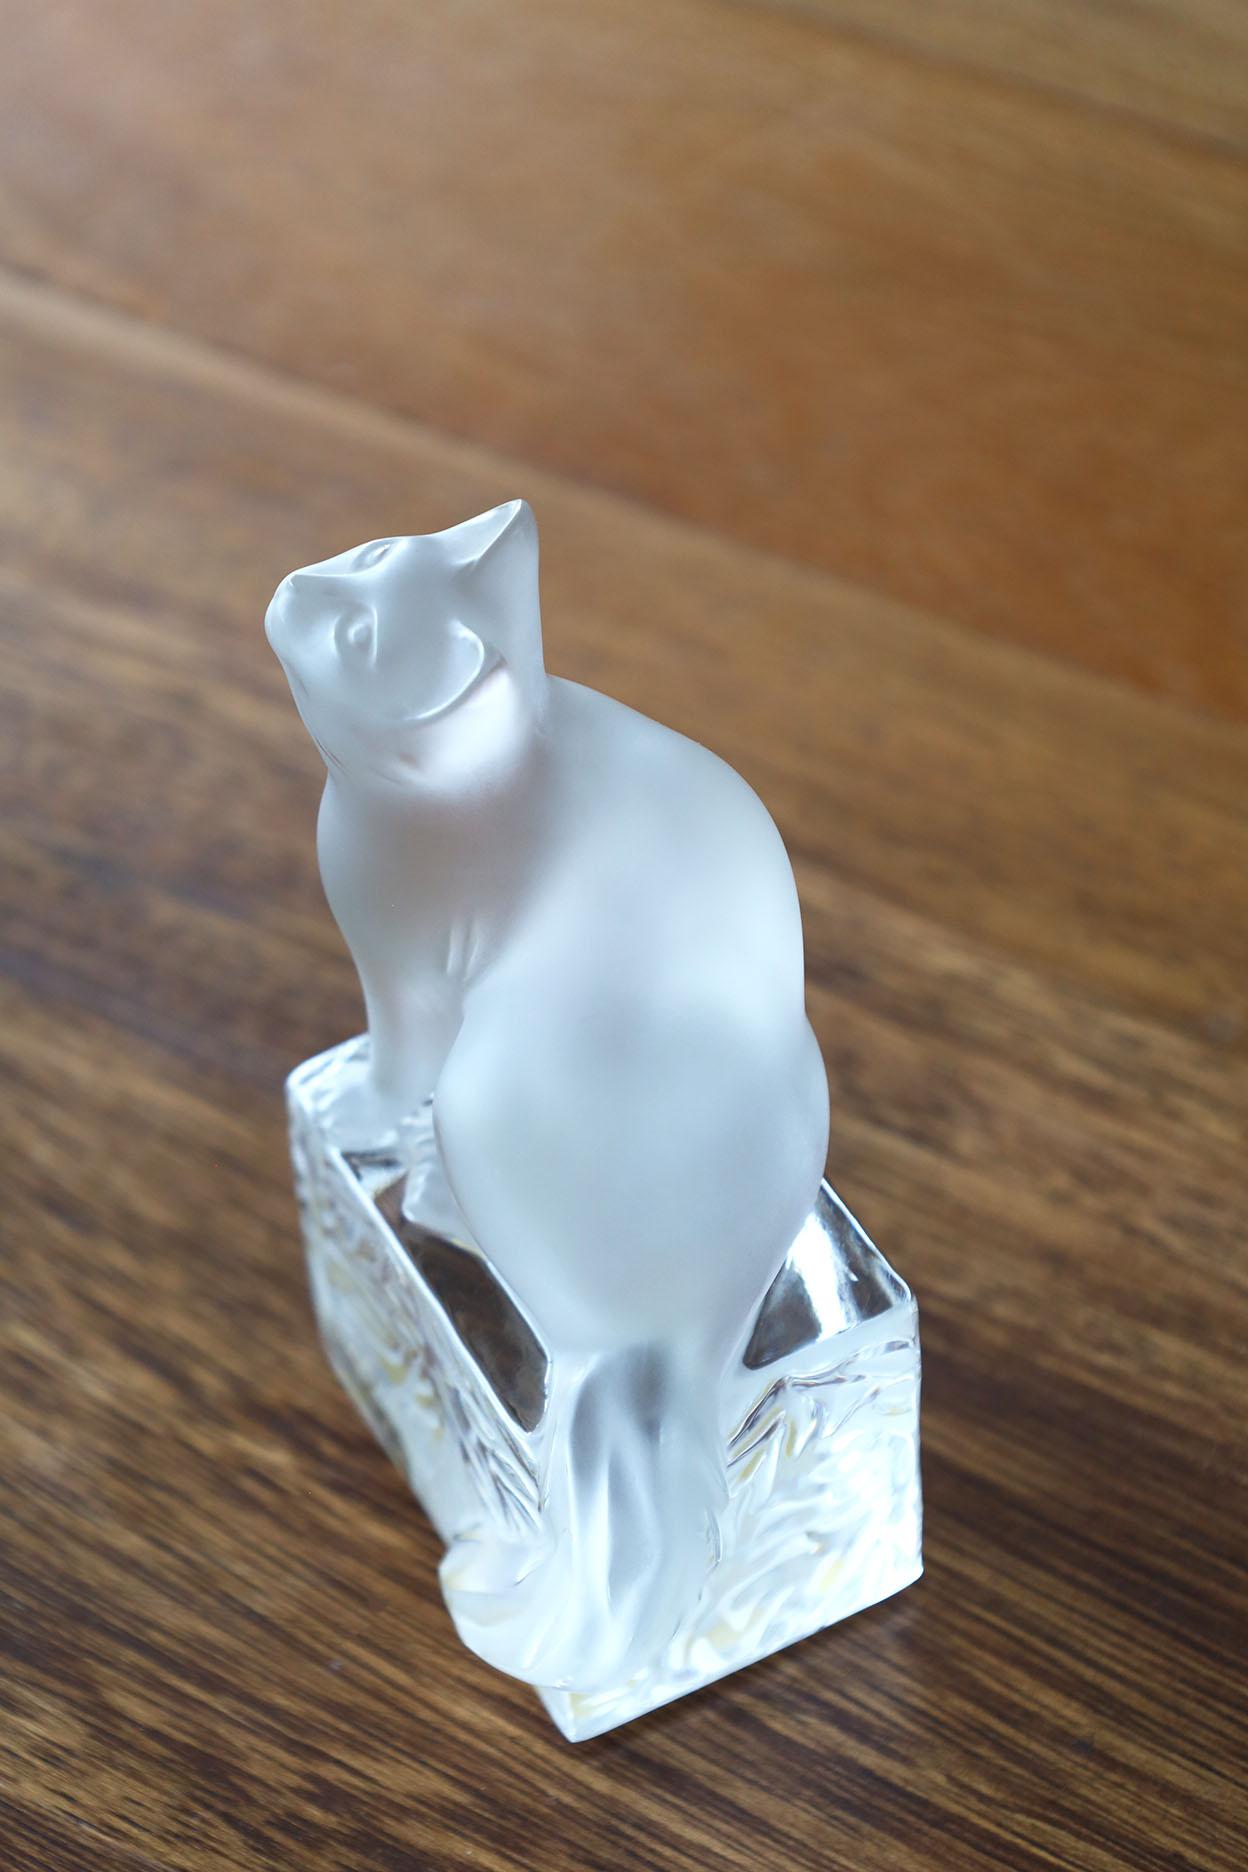 Lalique Sitting Cat Figurine Model 11676.
Frosted Crystal in very good original condition. With original Lalique sticker in the front and model 11676 sitter in the bottom. Signed.